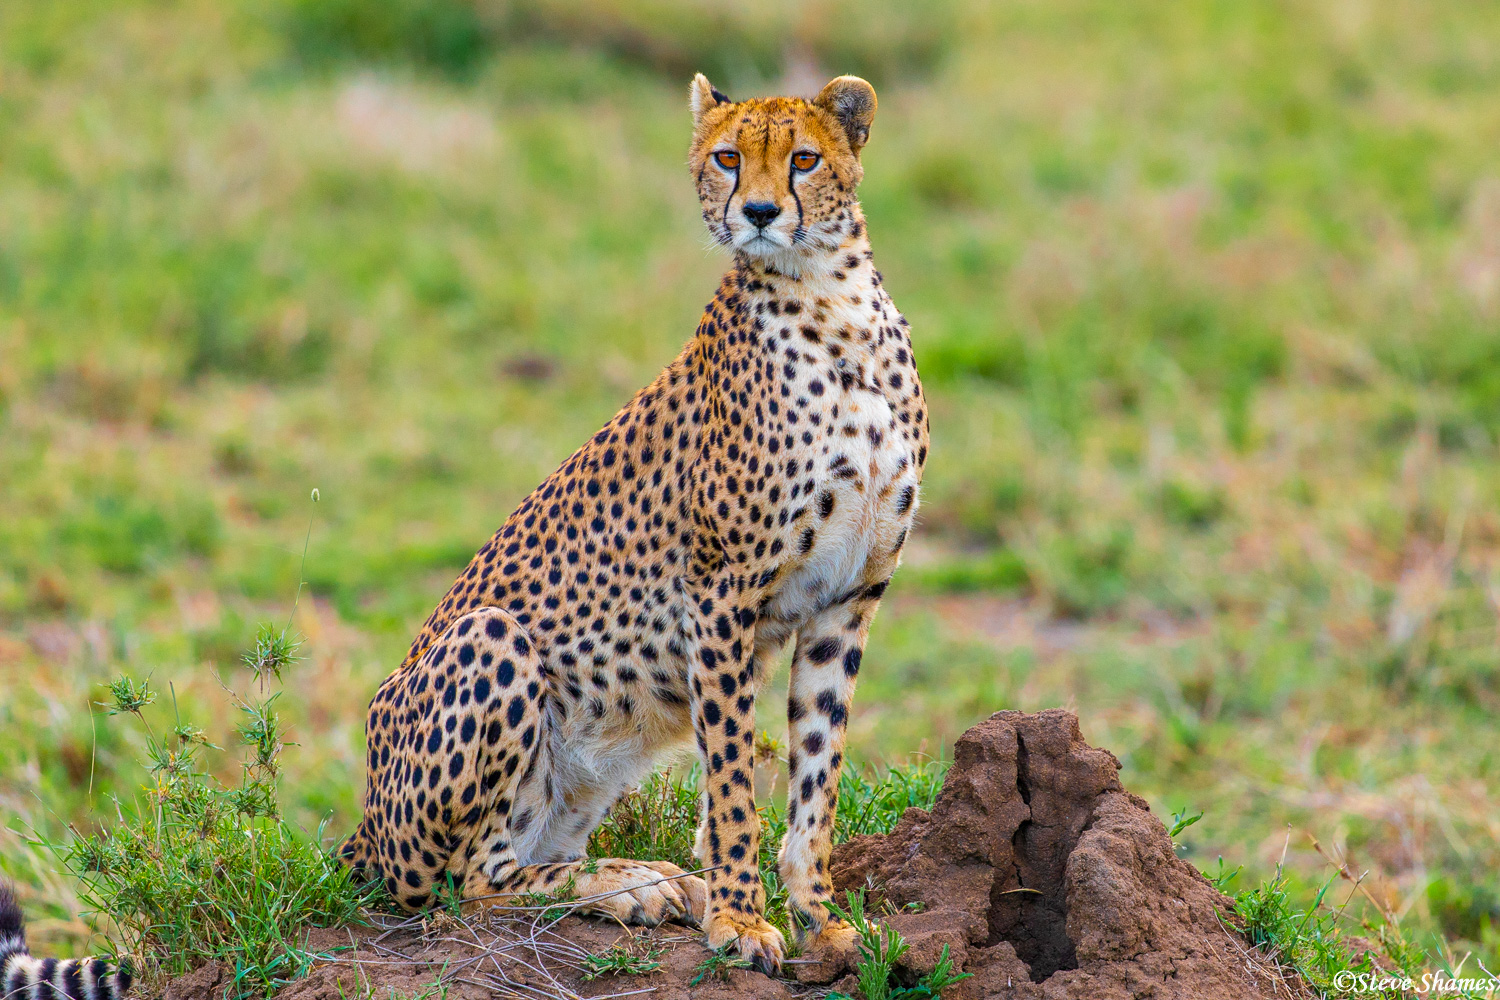 Our mother cheetah on lookout duty, propped up on her termite mound